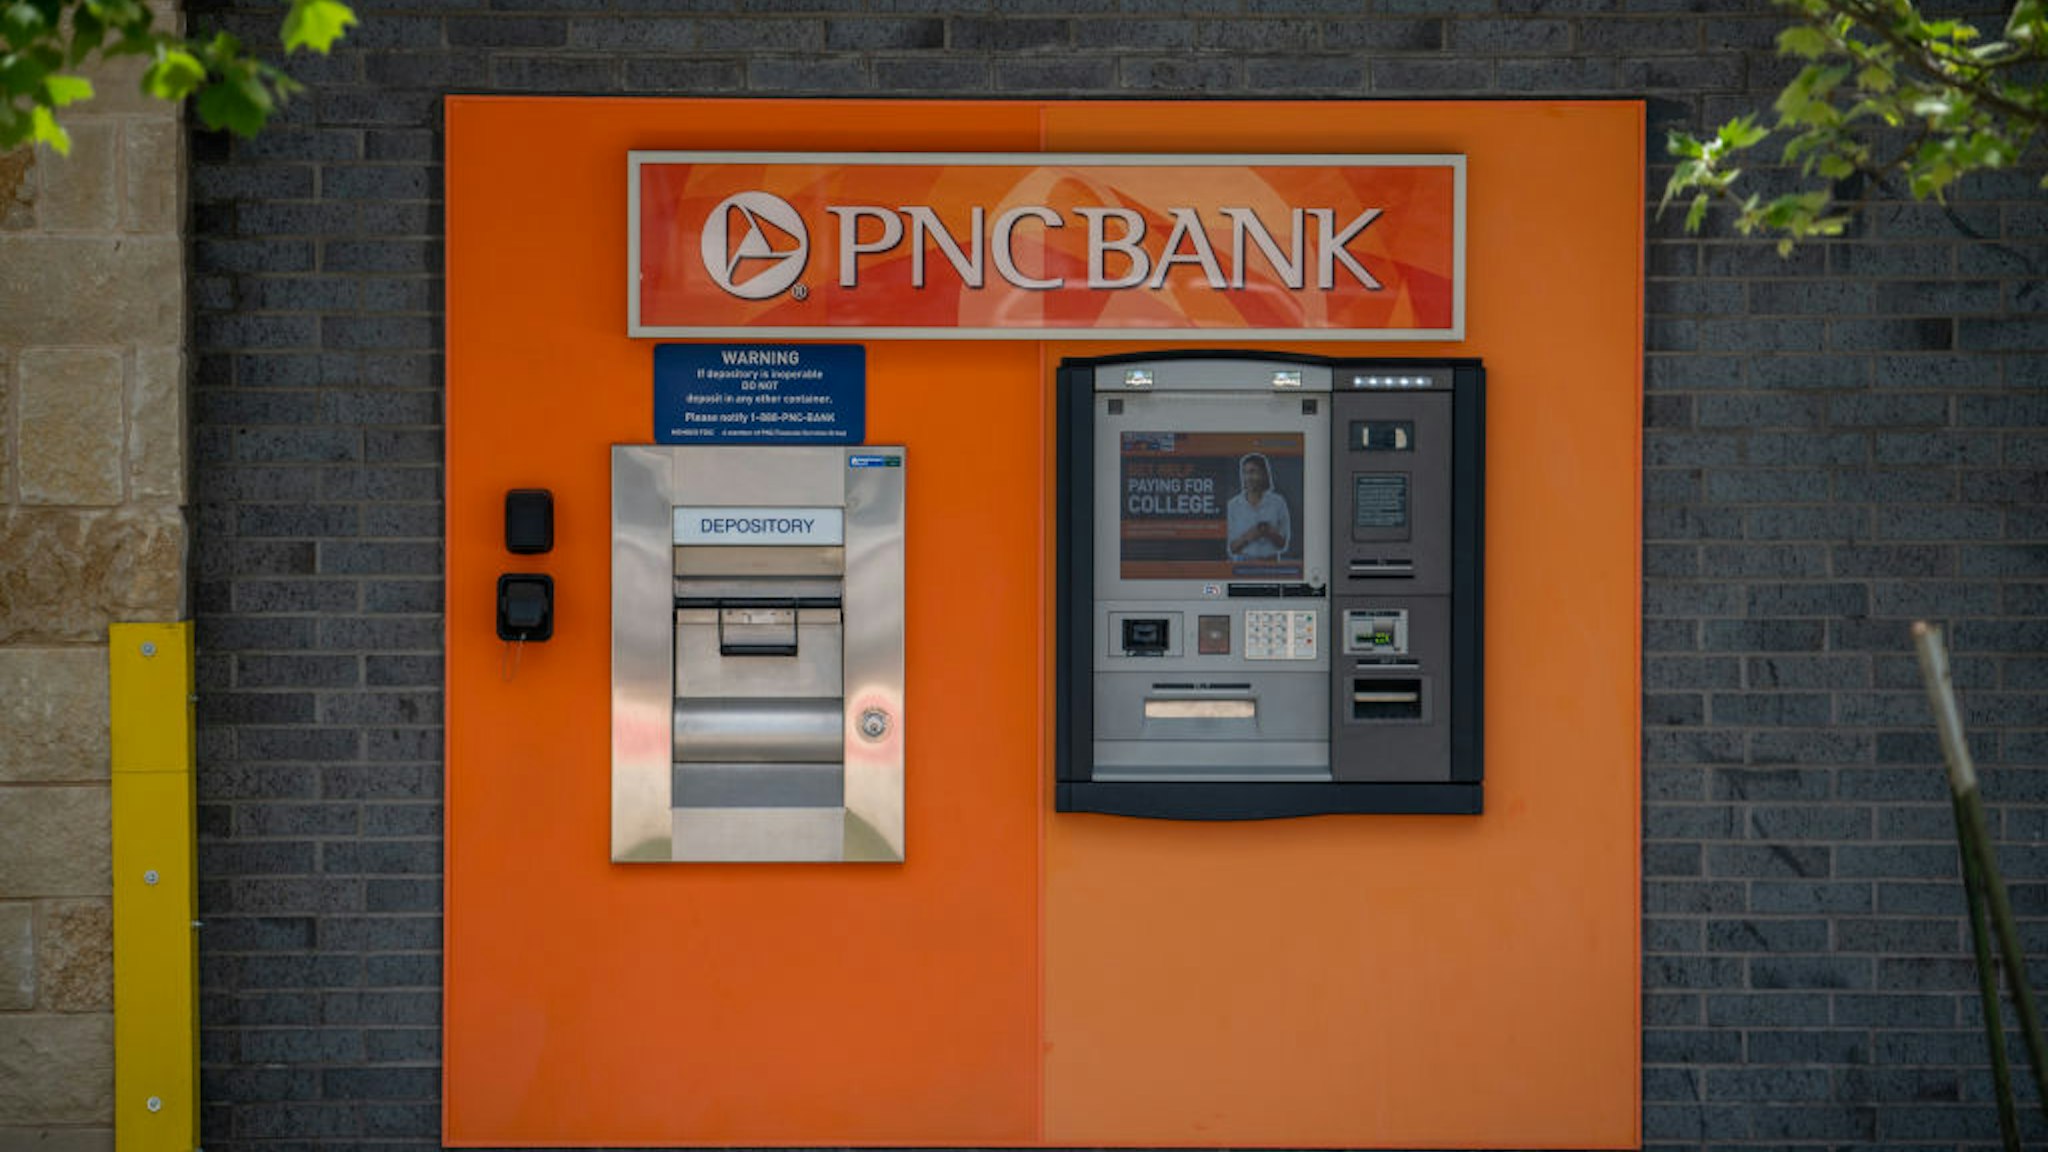 An automated teller machine (ATM) at a PNC Bank branch in Austin, Texas, US, on Tuesday, April 11, 2022. PNC Financial Services Group is scheduled to release earnings figures on April 14. Photographer: Sergio Flores/Bloomberg via Getty Images